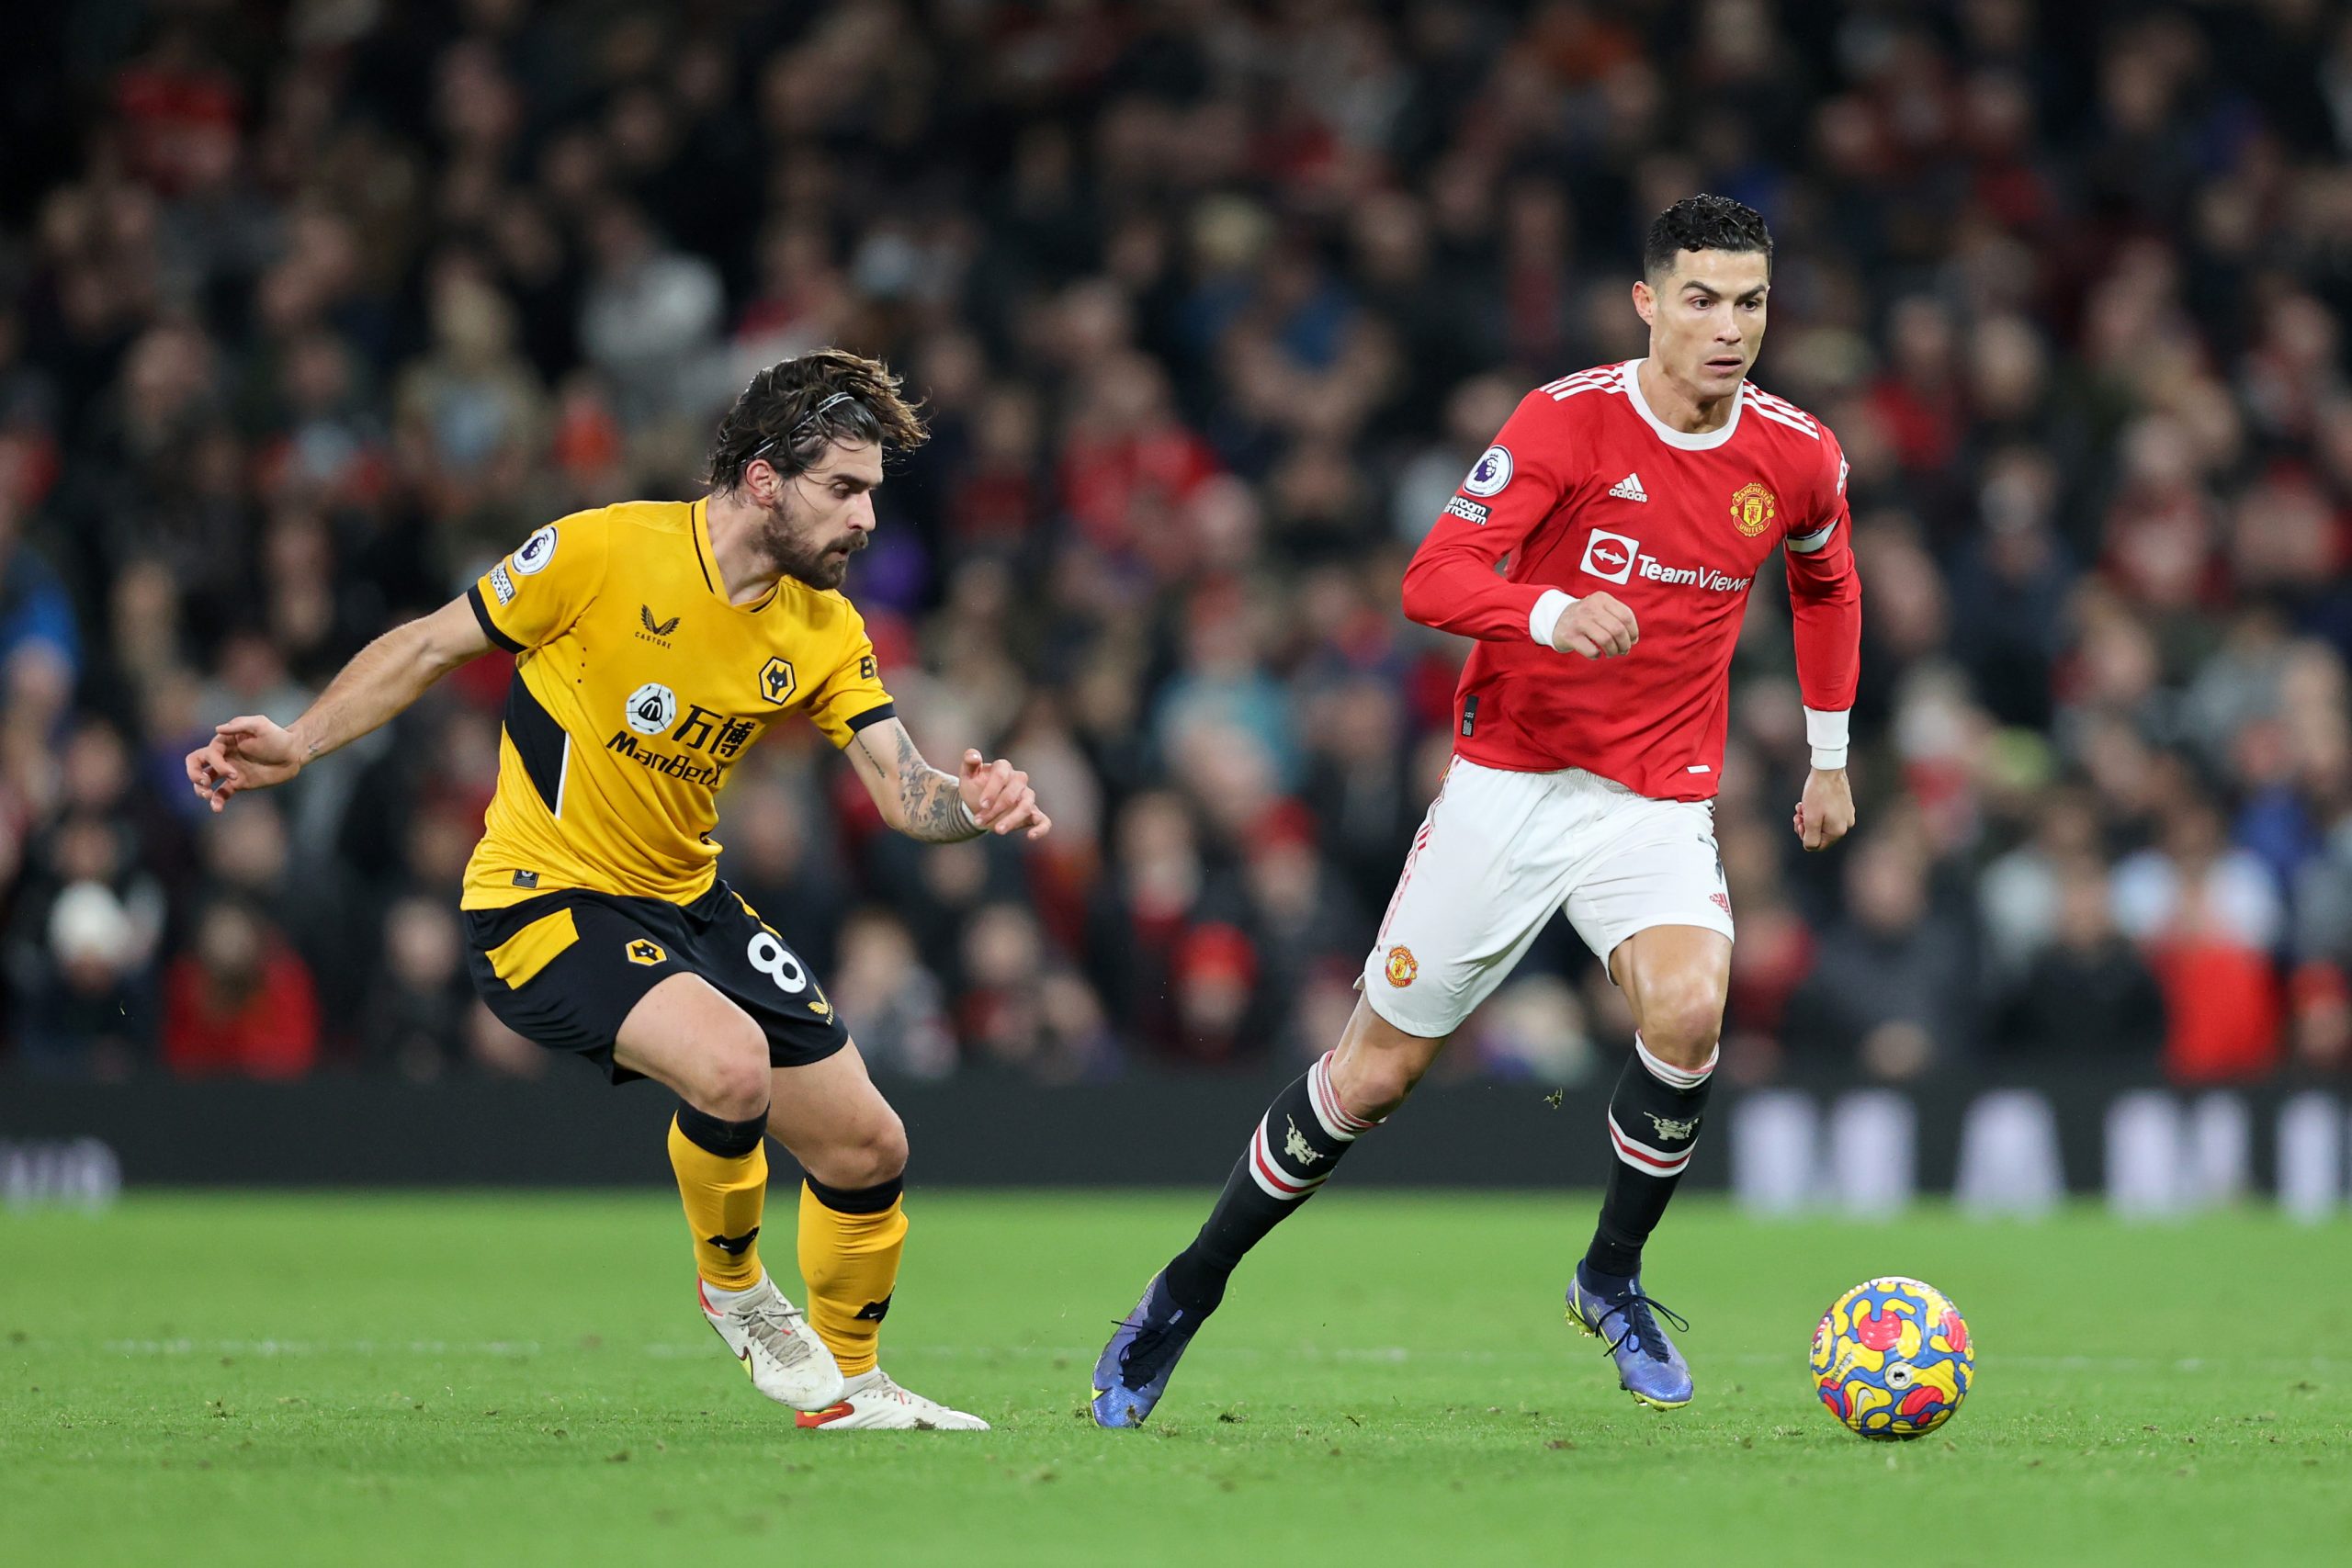 Cristiano Ronaldo of Manchester United in action against Wolves' Ruben Neves.